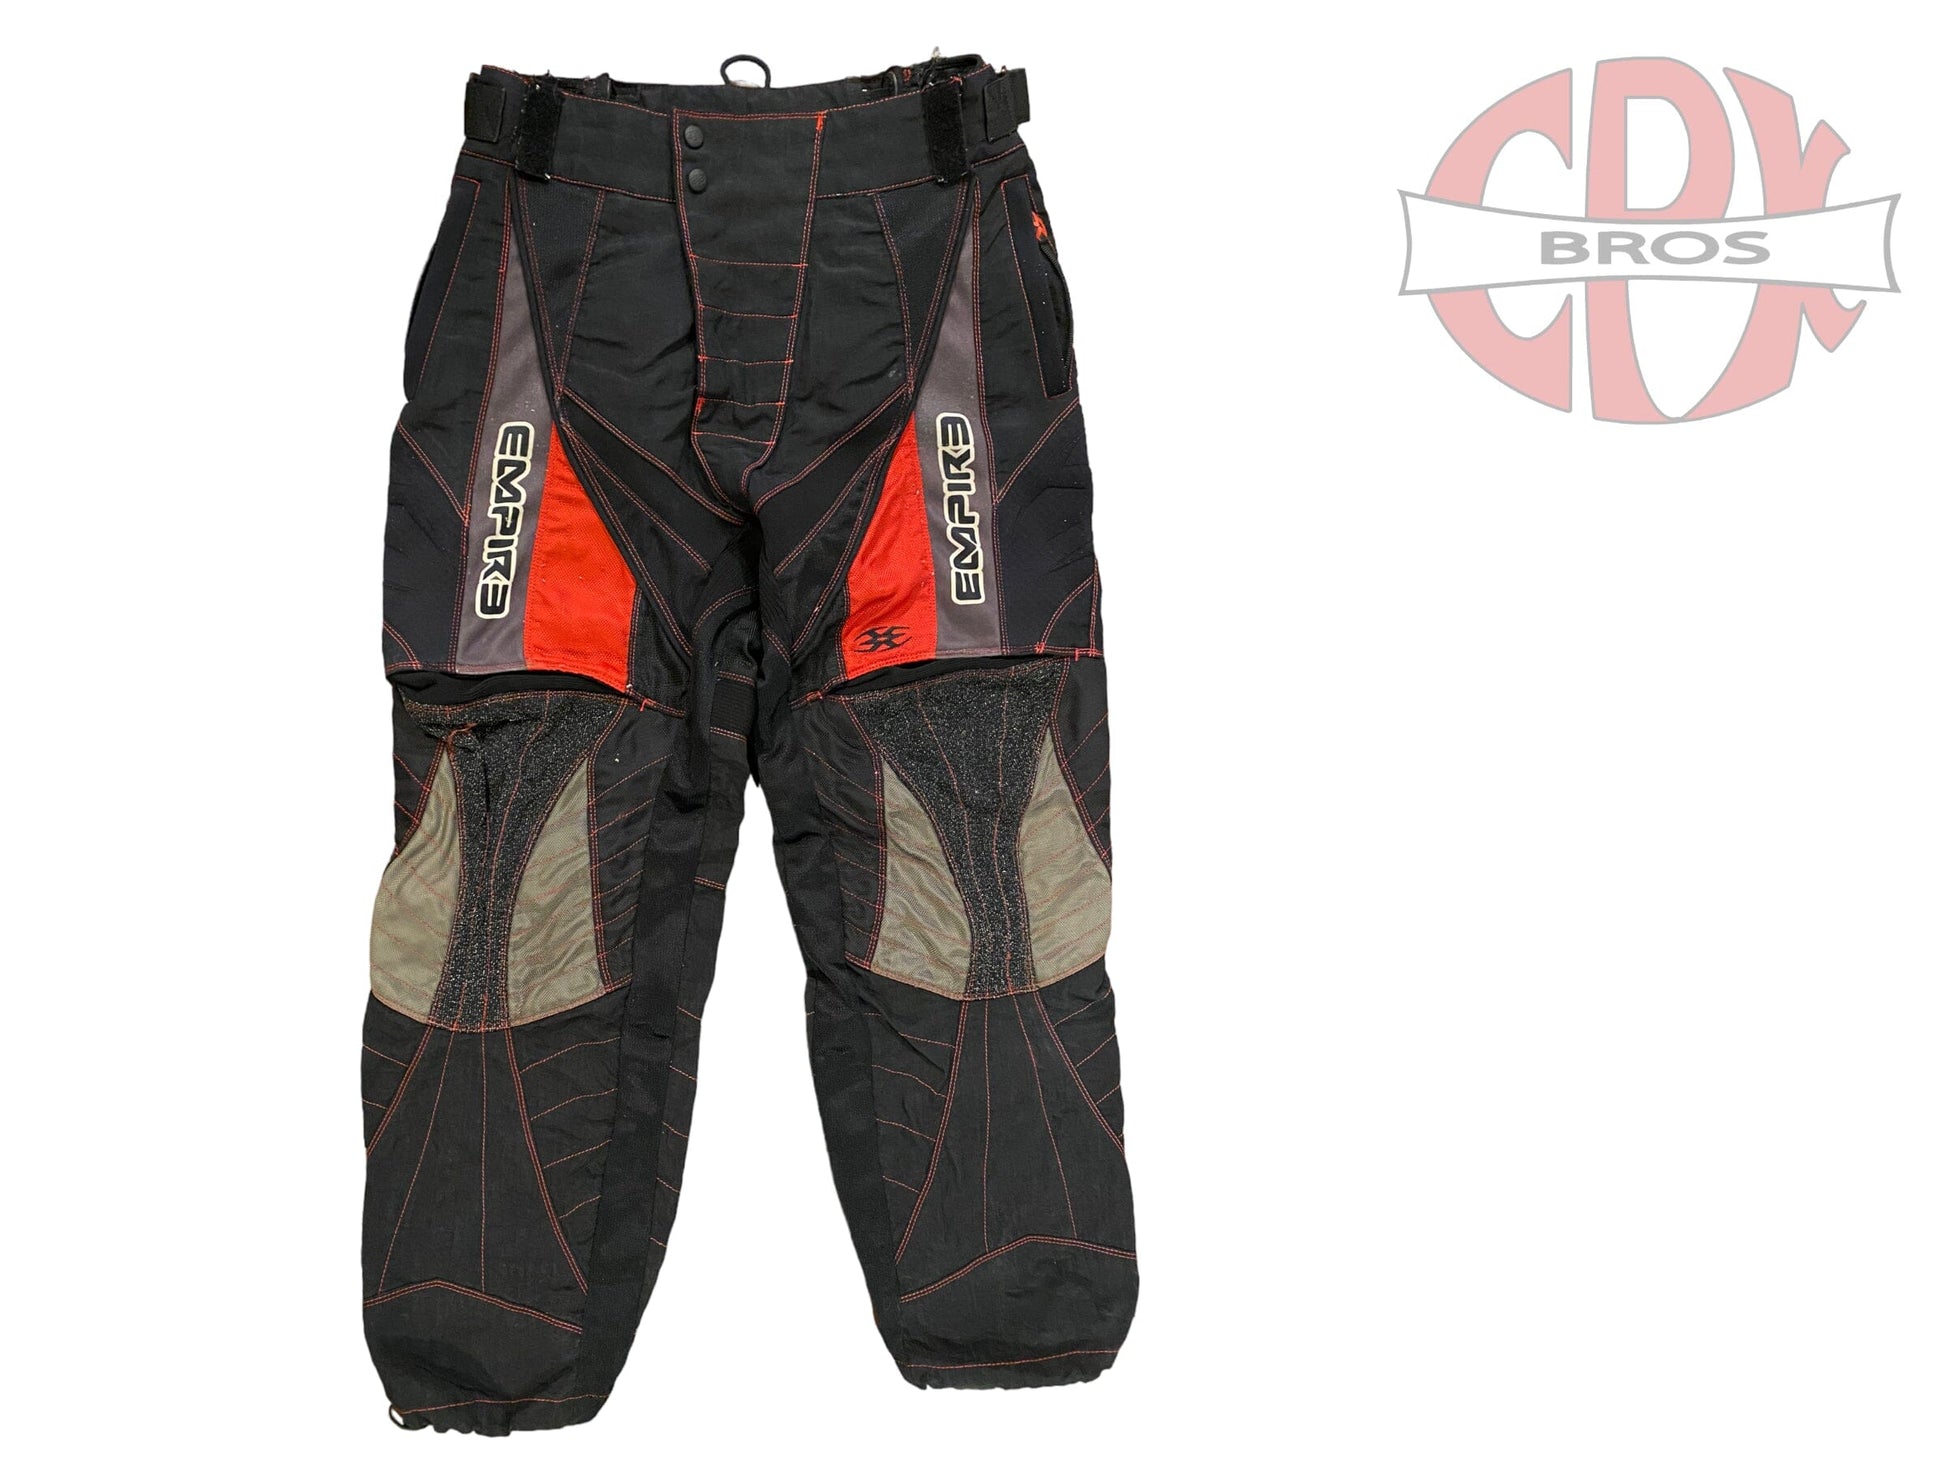 Used Empire Paintball Pants Size Large(34-36) Paintball Gun from CPXBrosPaintball Buy/Sell/Trade Paintball Markers, New Paintball Guns, Paintball Hoppers, Paintball Masks, and Hormesis Headbands